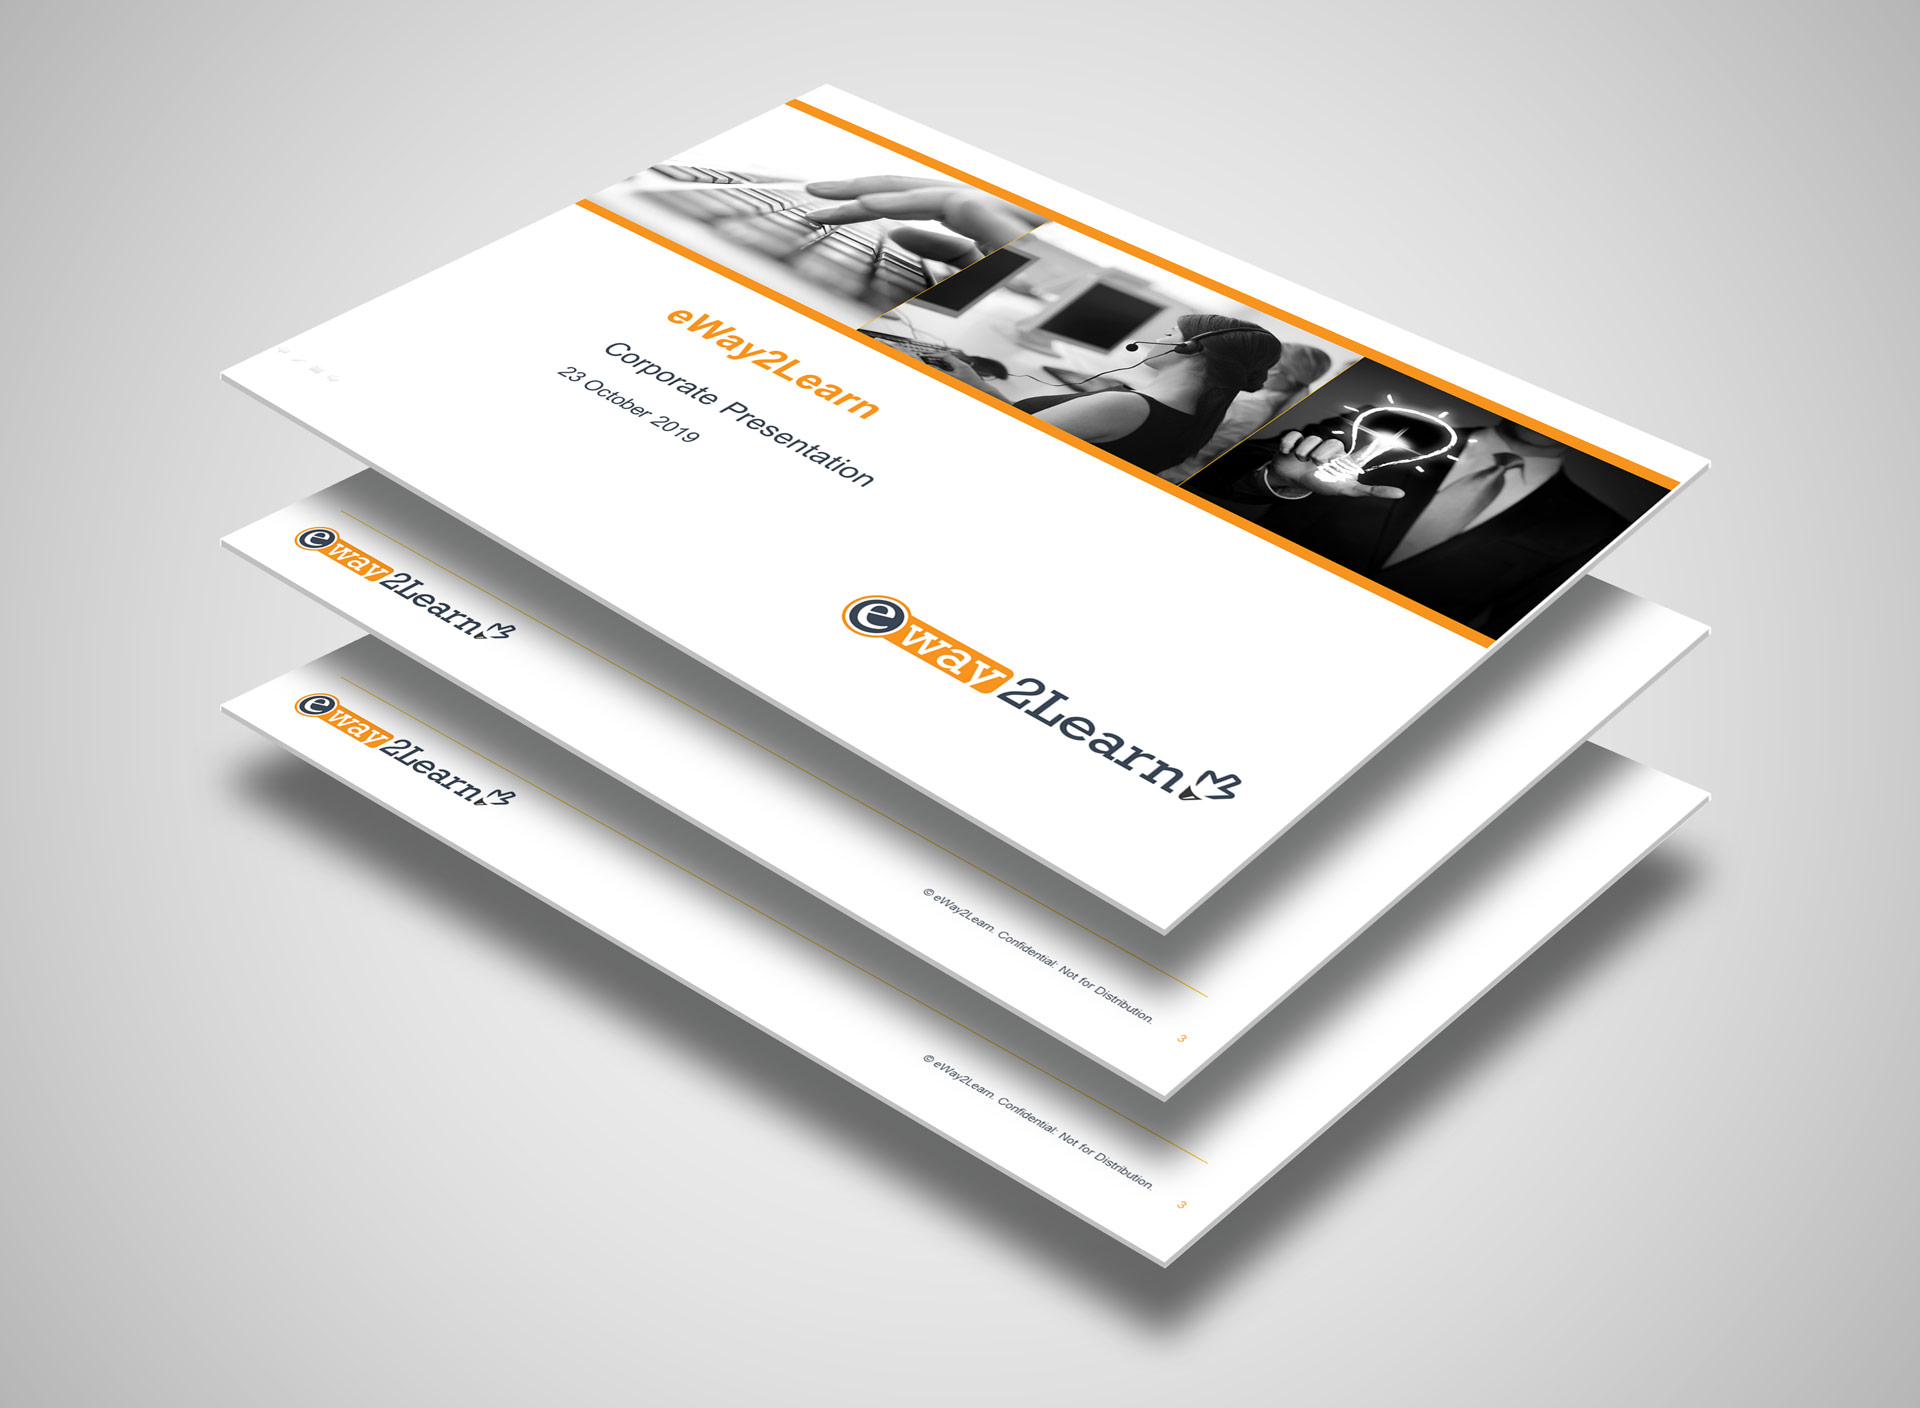 PowerPoint template design for eway2learn - online training company